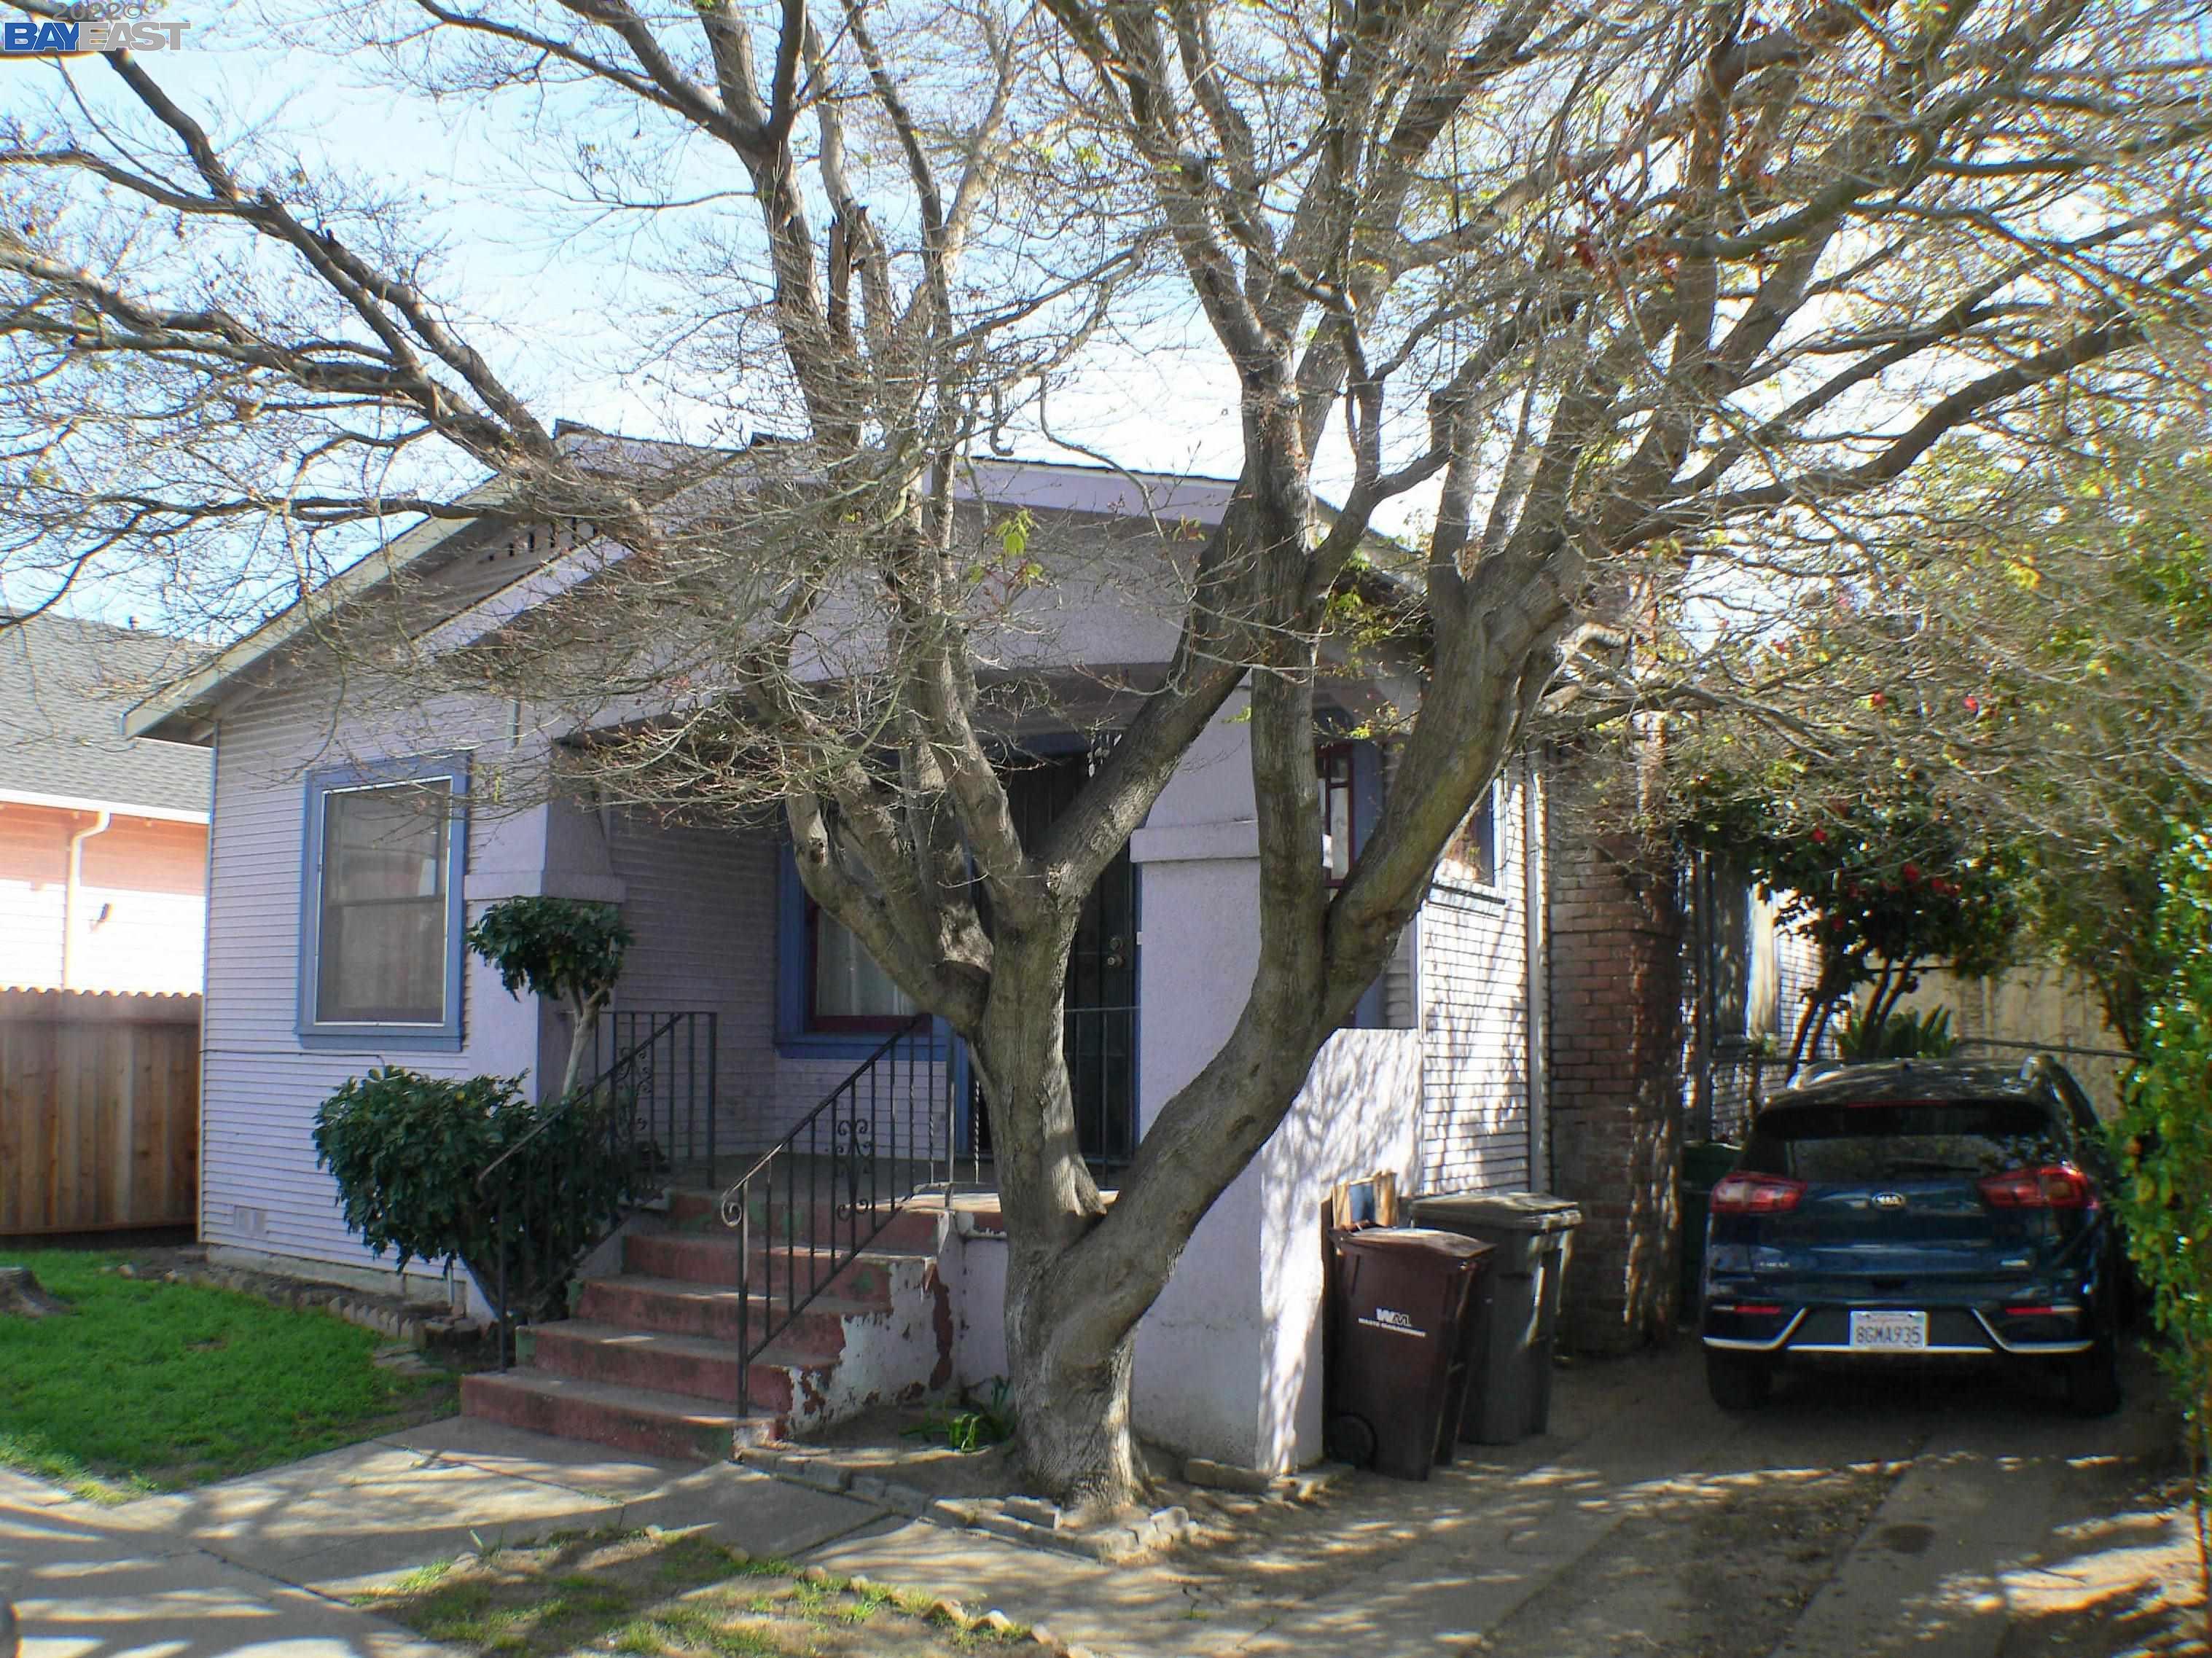 Photo of 1336 107th Ave in Oakland, CA